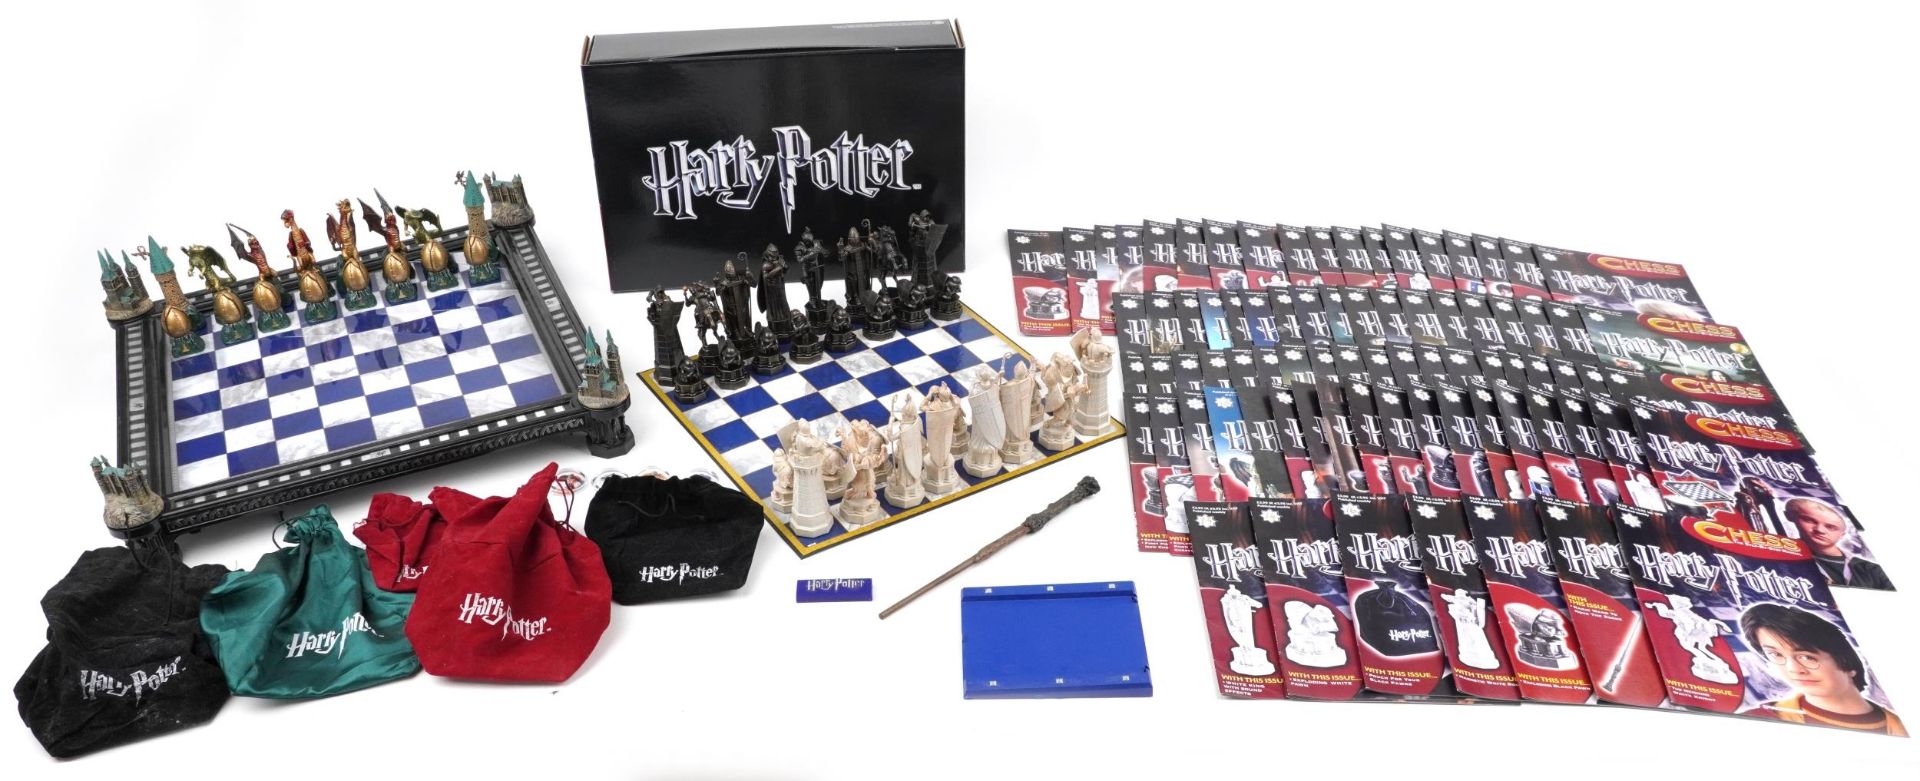 Harry Potter chess set with board and magazine published by D'Agostino 2007, the largest pieces